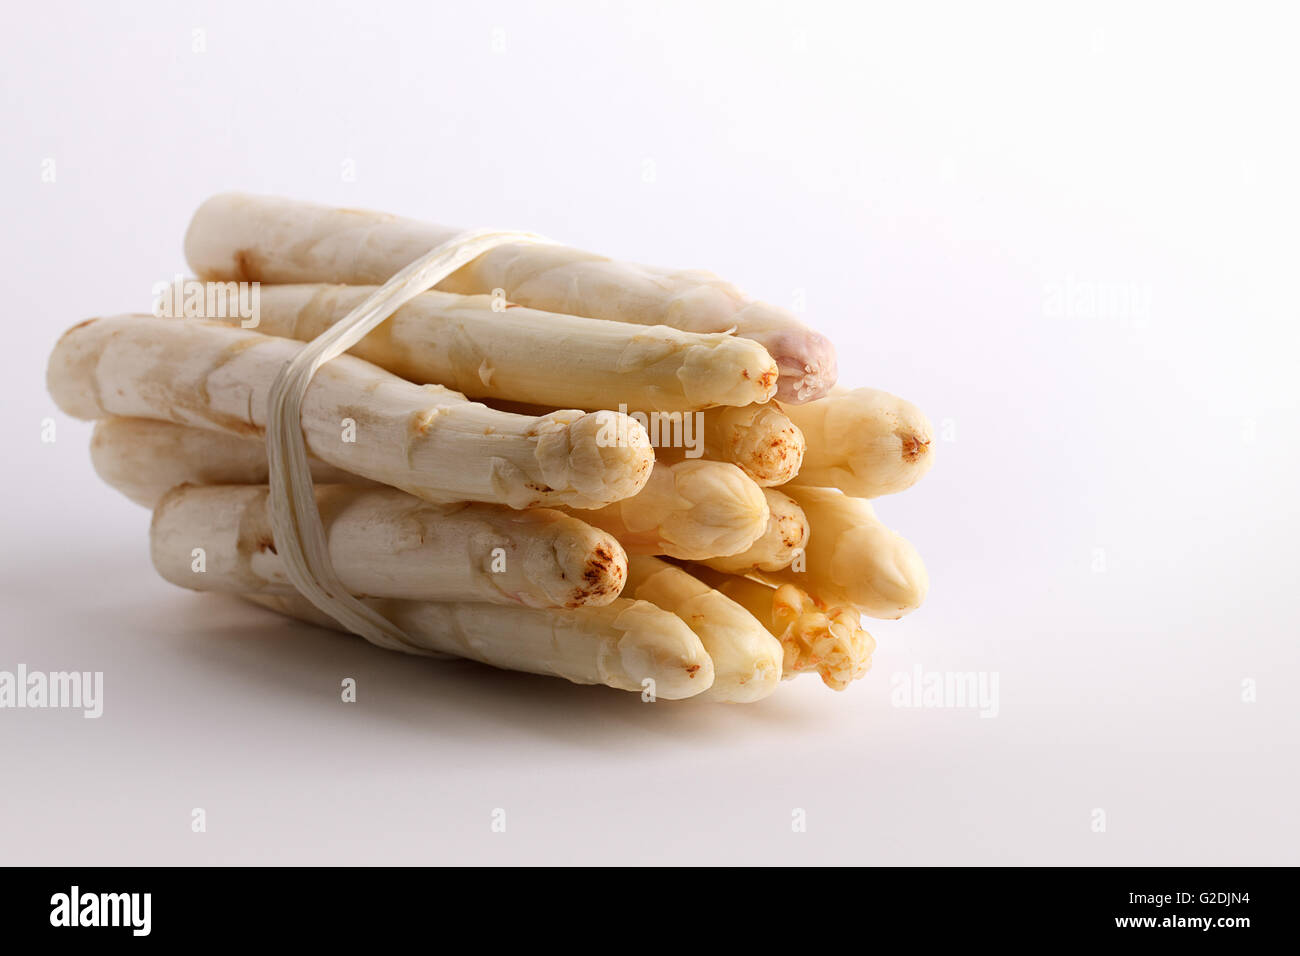 Bunch of fresh white asparagus spears ready to be used as an ingredient in cooking Stock Photo